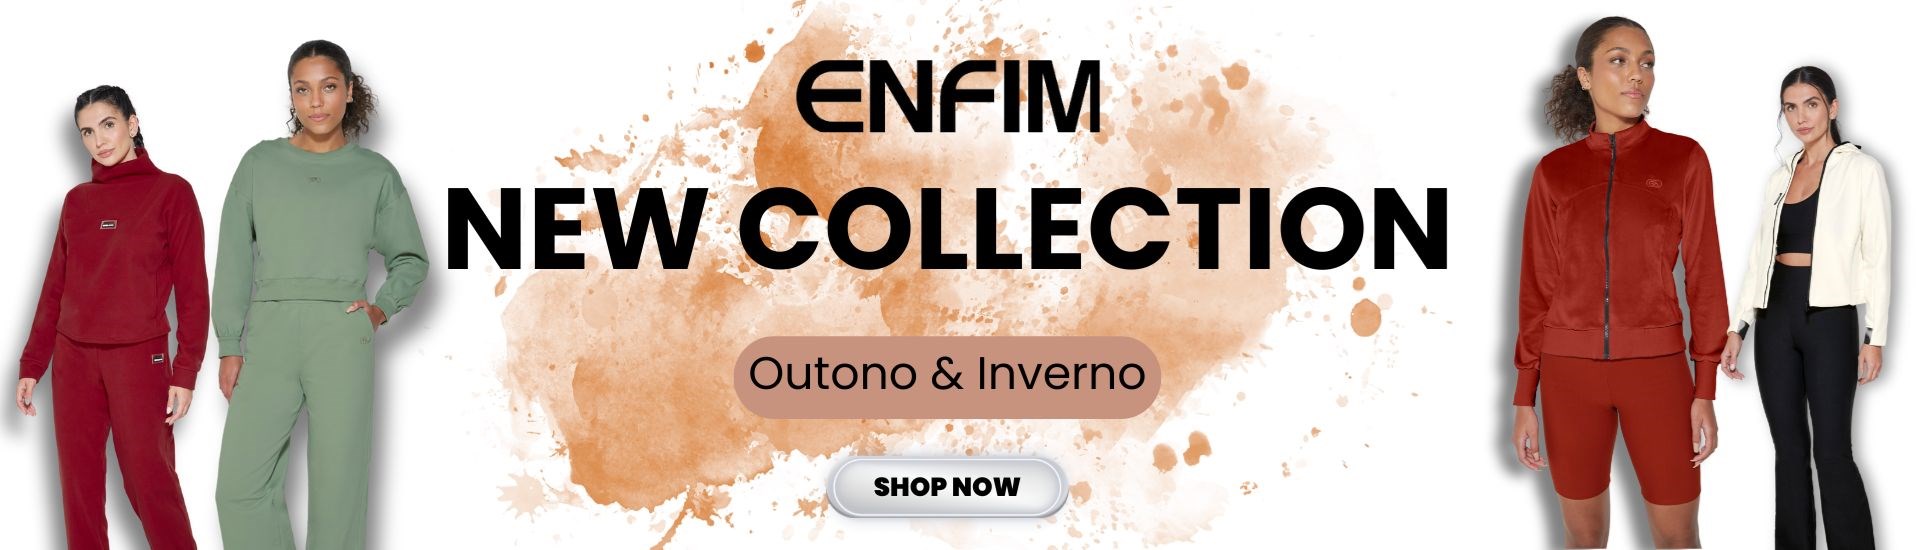 New collection Enfim